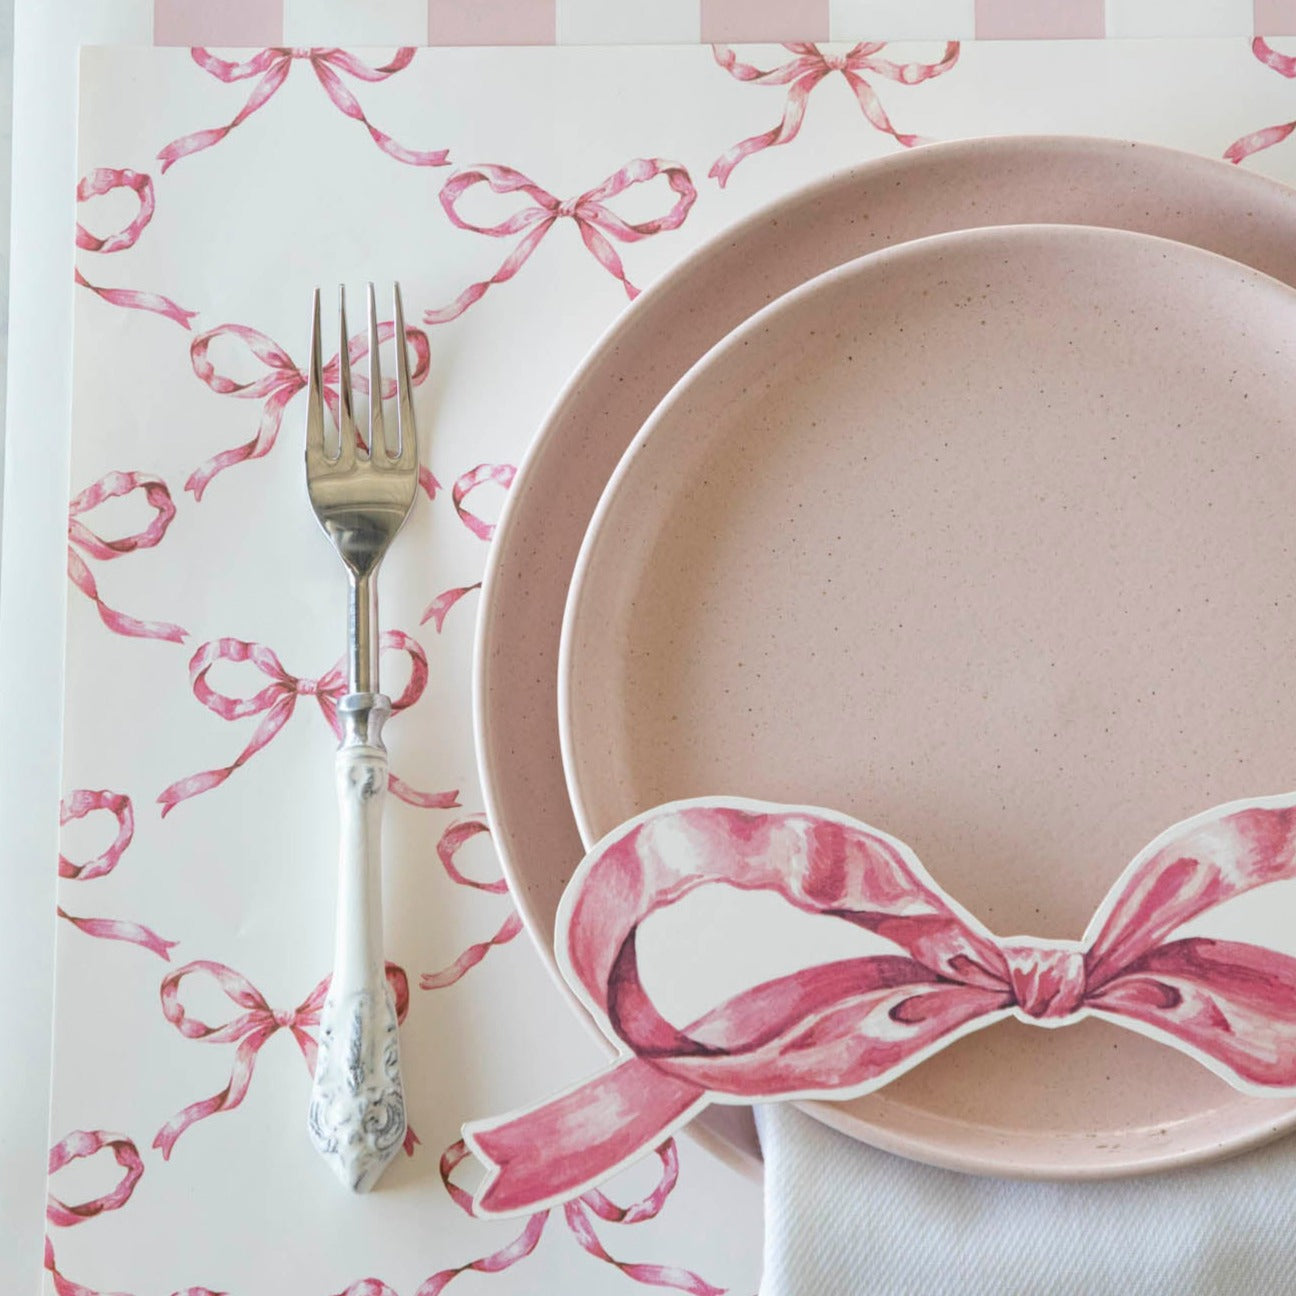 A plate and fork on a Pink Bow Table Accent from Hester &amp; Cook.